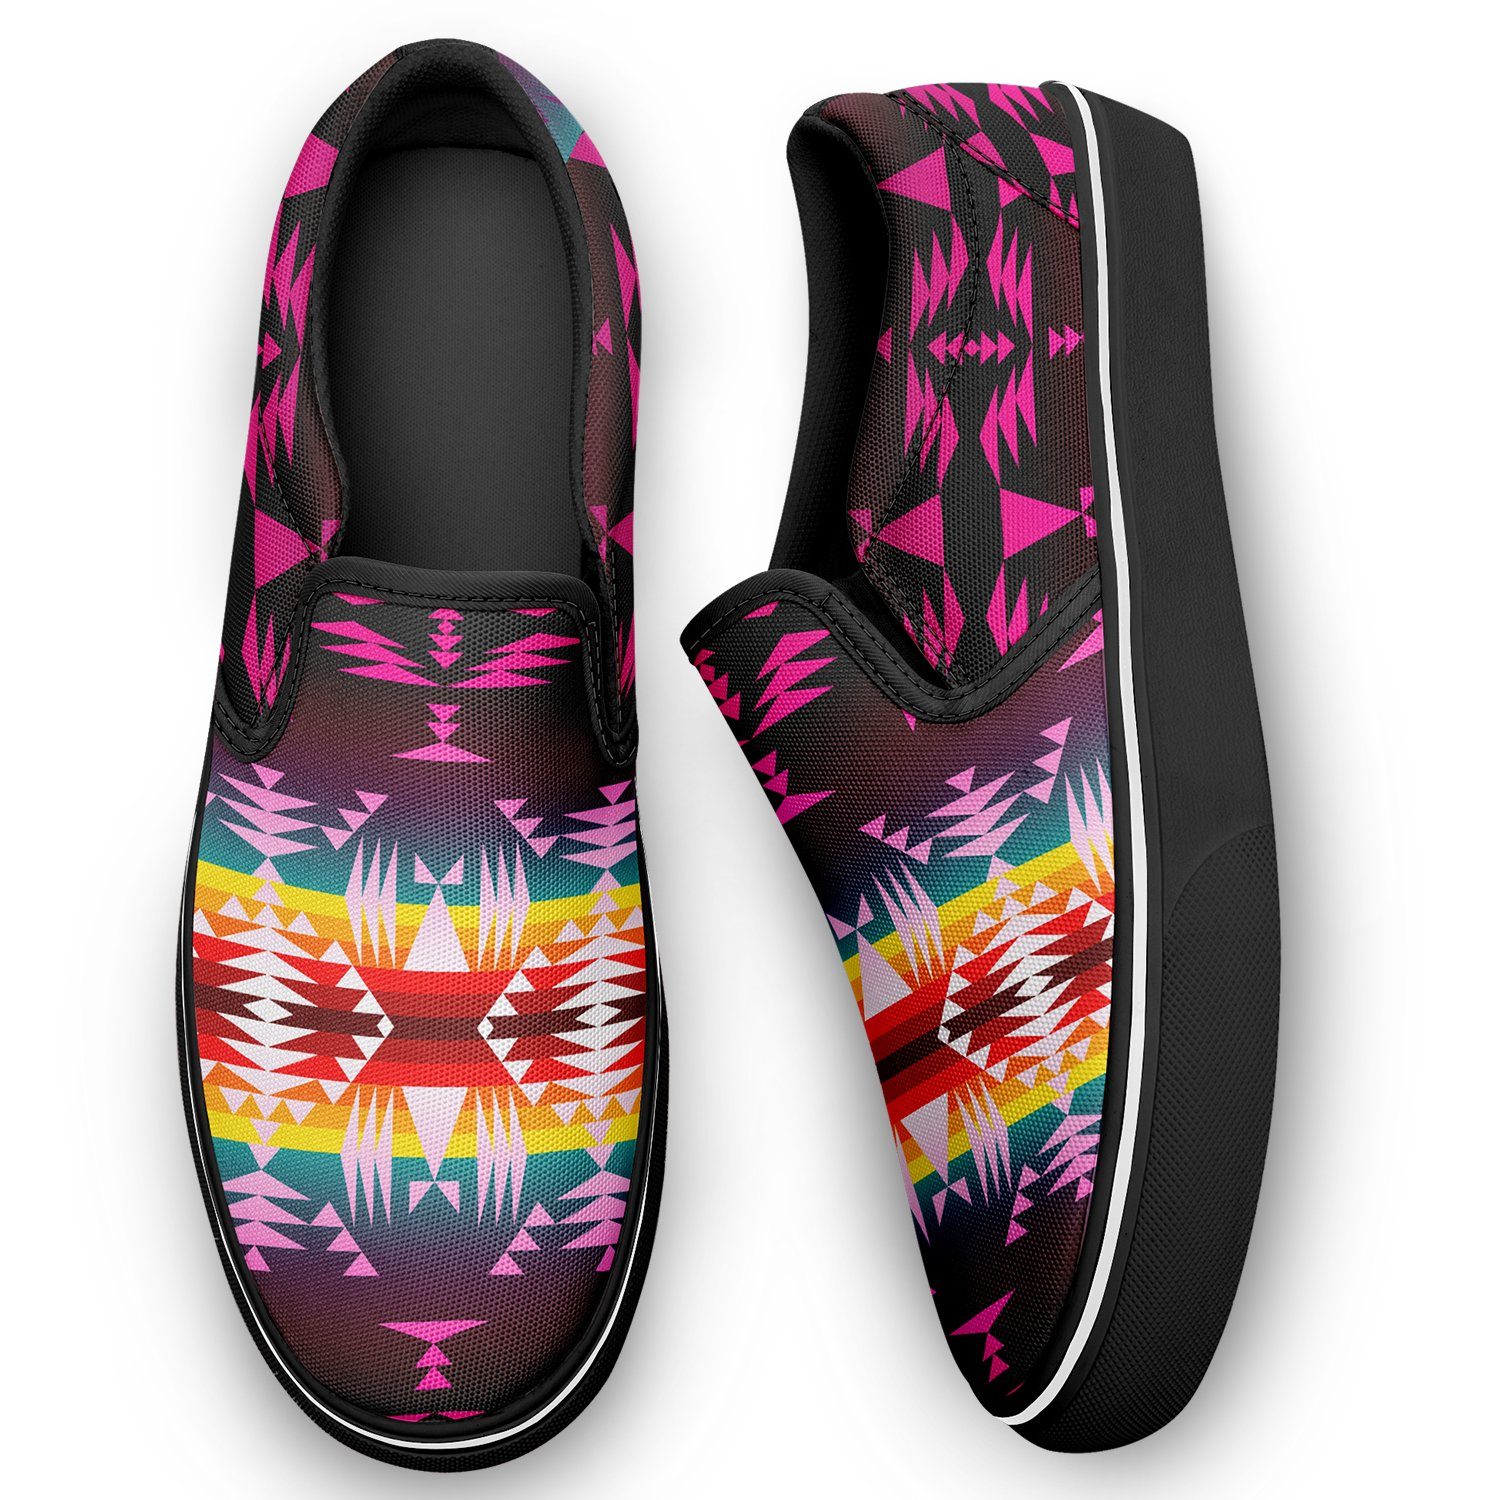 Between the Appalachian Mountains Otoyimm Canvas Slip On Shoes otoyimm Herman 